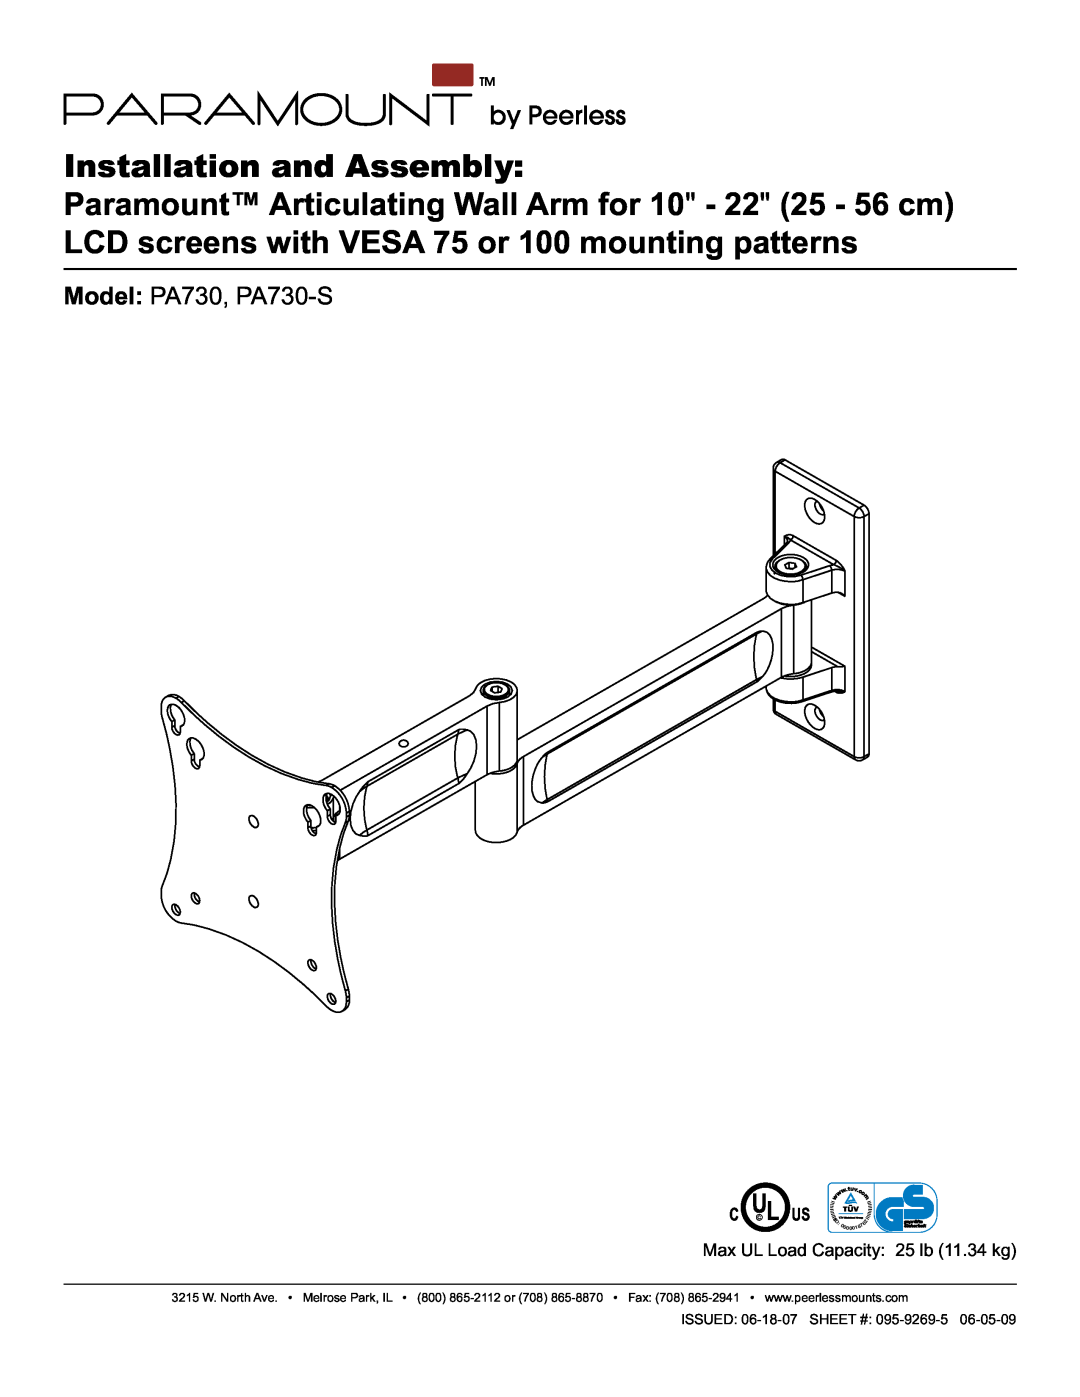 Peerless Industries PA730-S manual Installation and Assembly, Paramount Articulating Wall Arm for 10 - 22 25 - 56 cm, 0018 